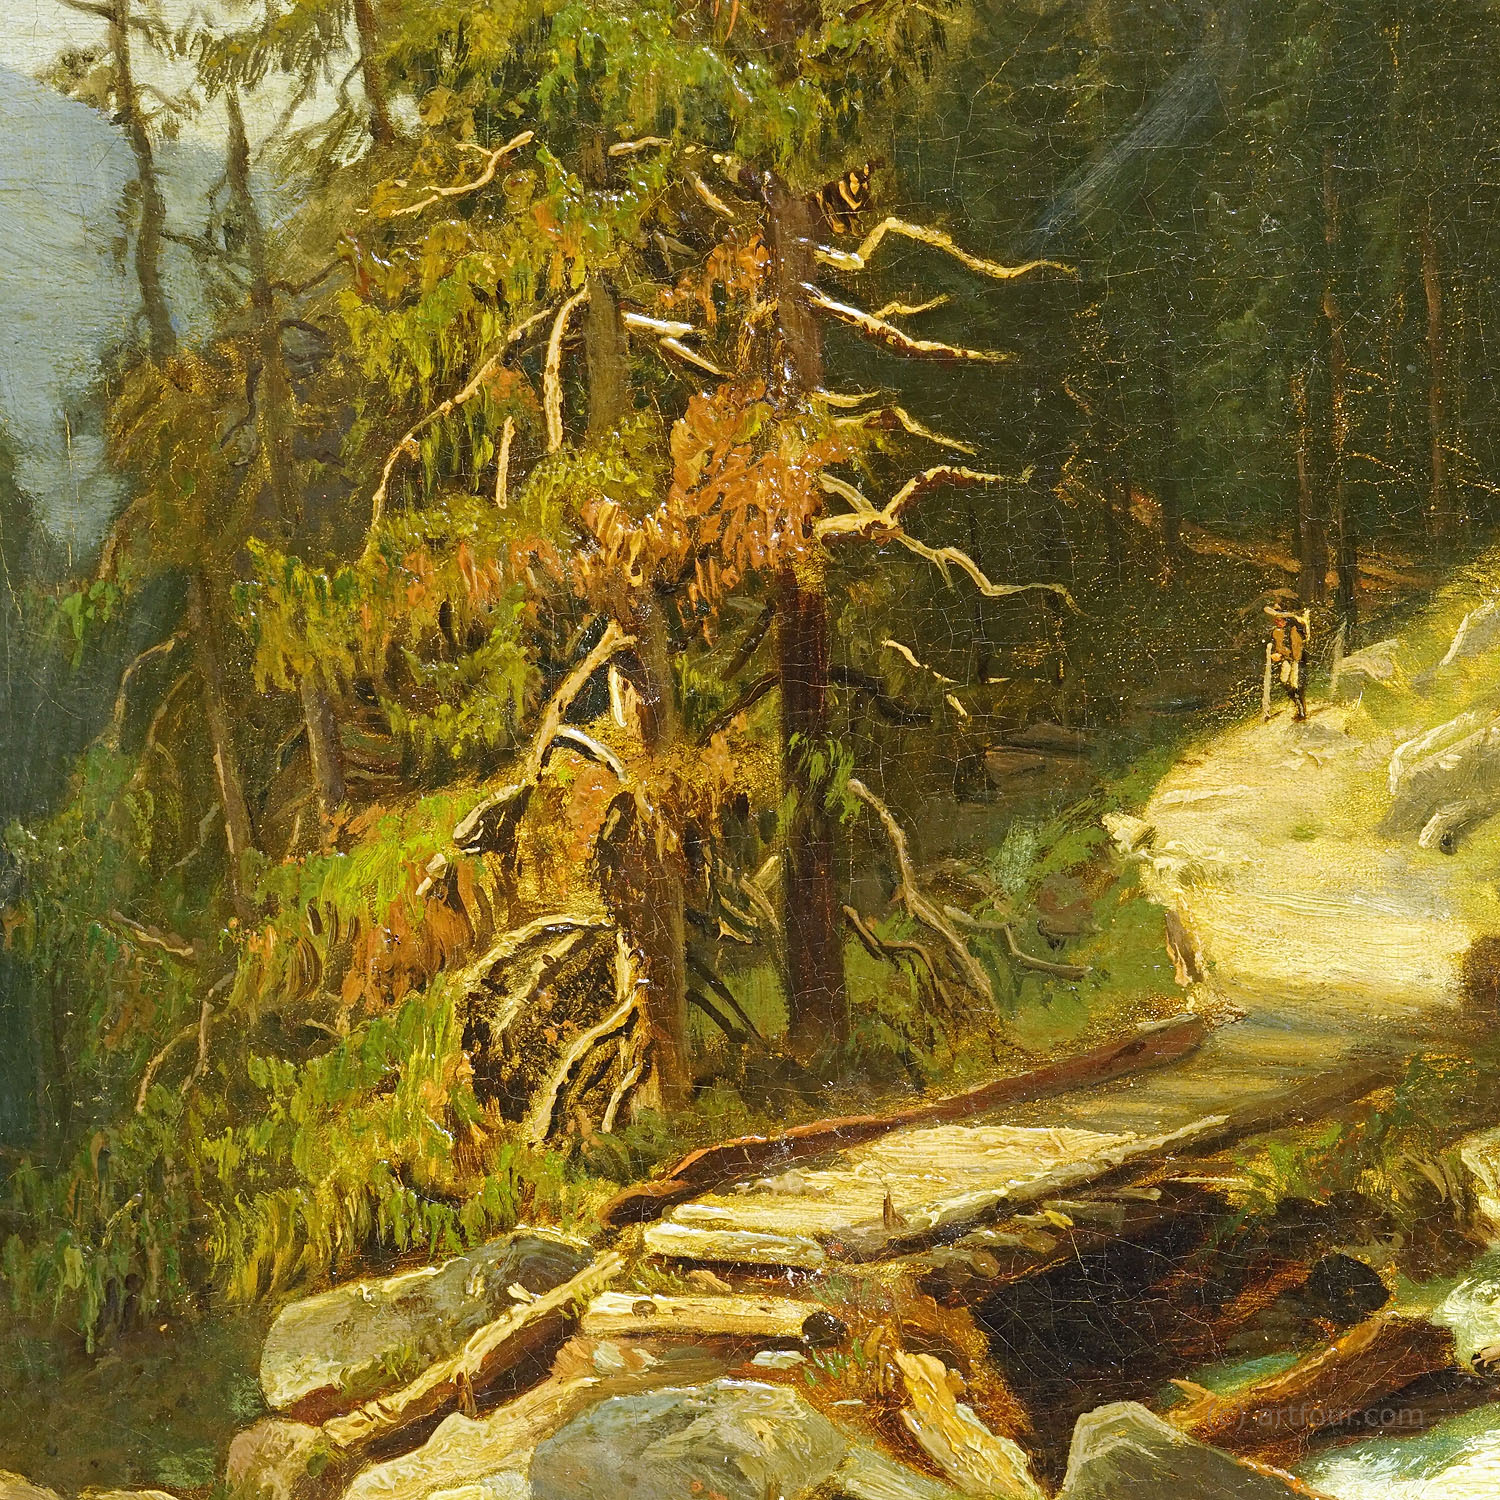 Summerly Mountain Landscape with Hiker on Hiking Trail, 19th century